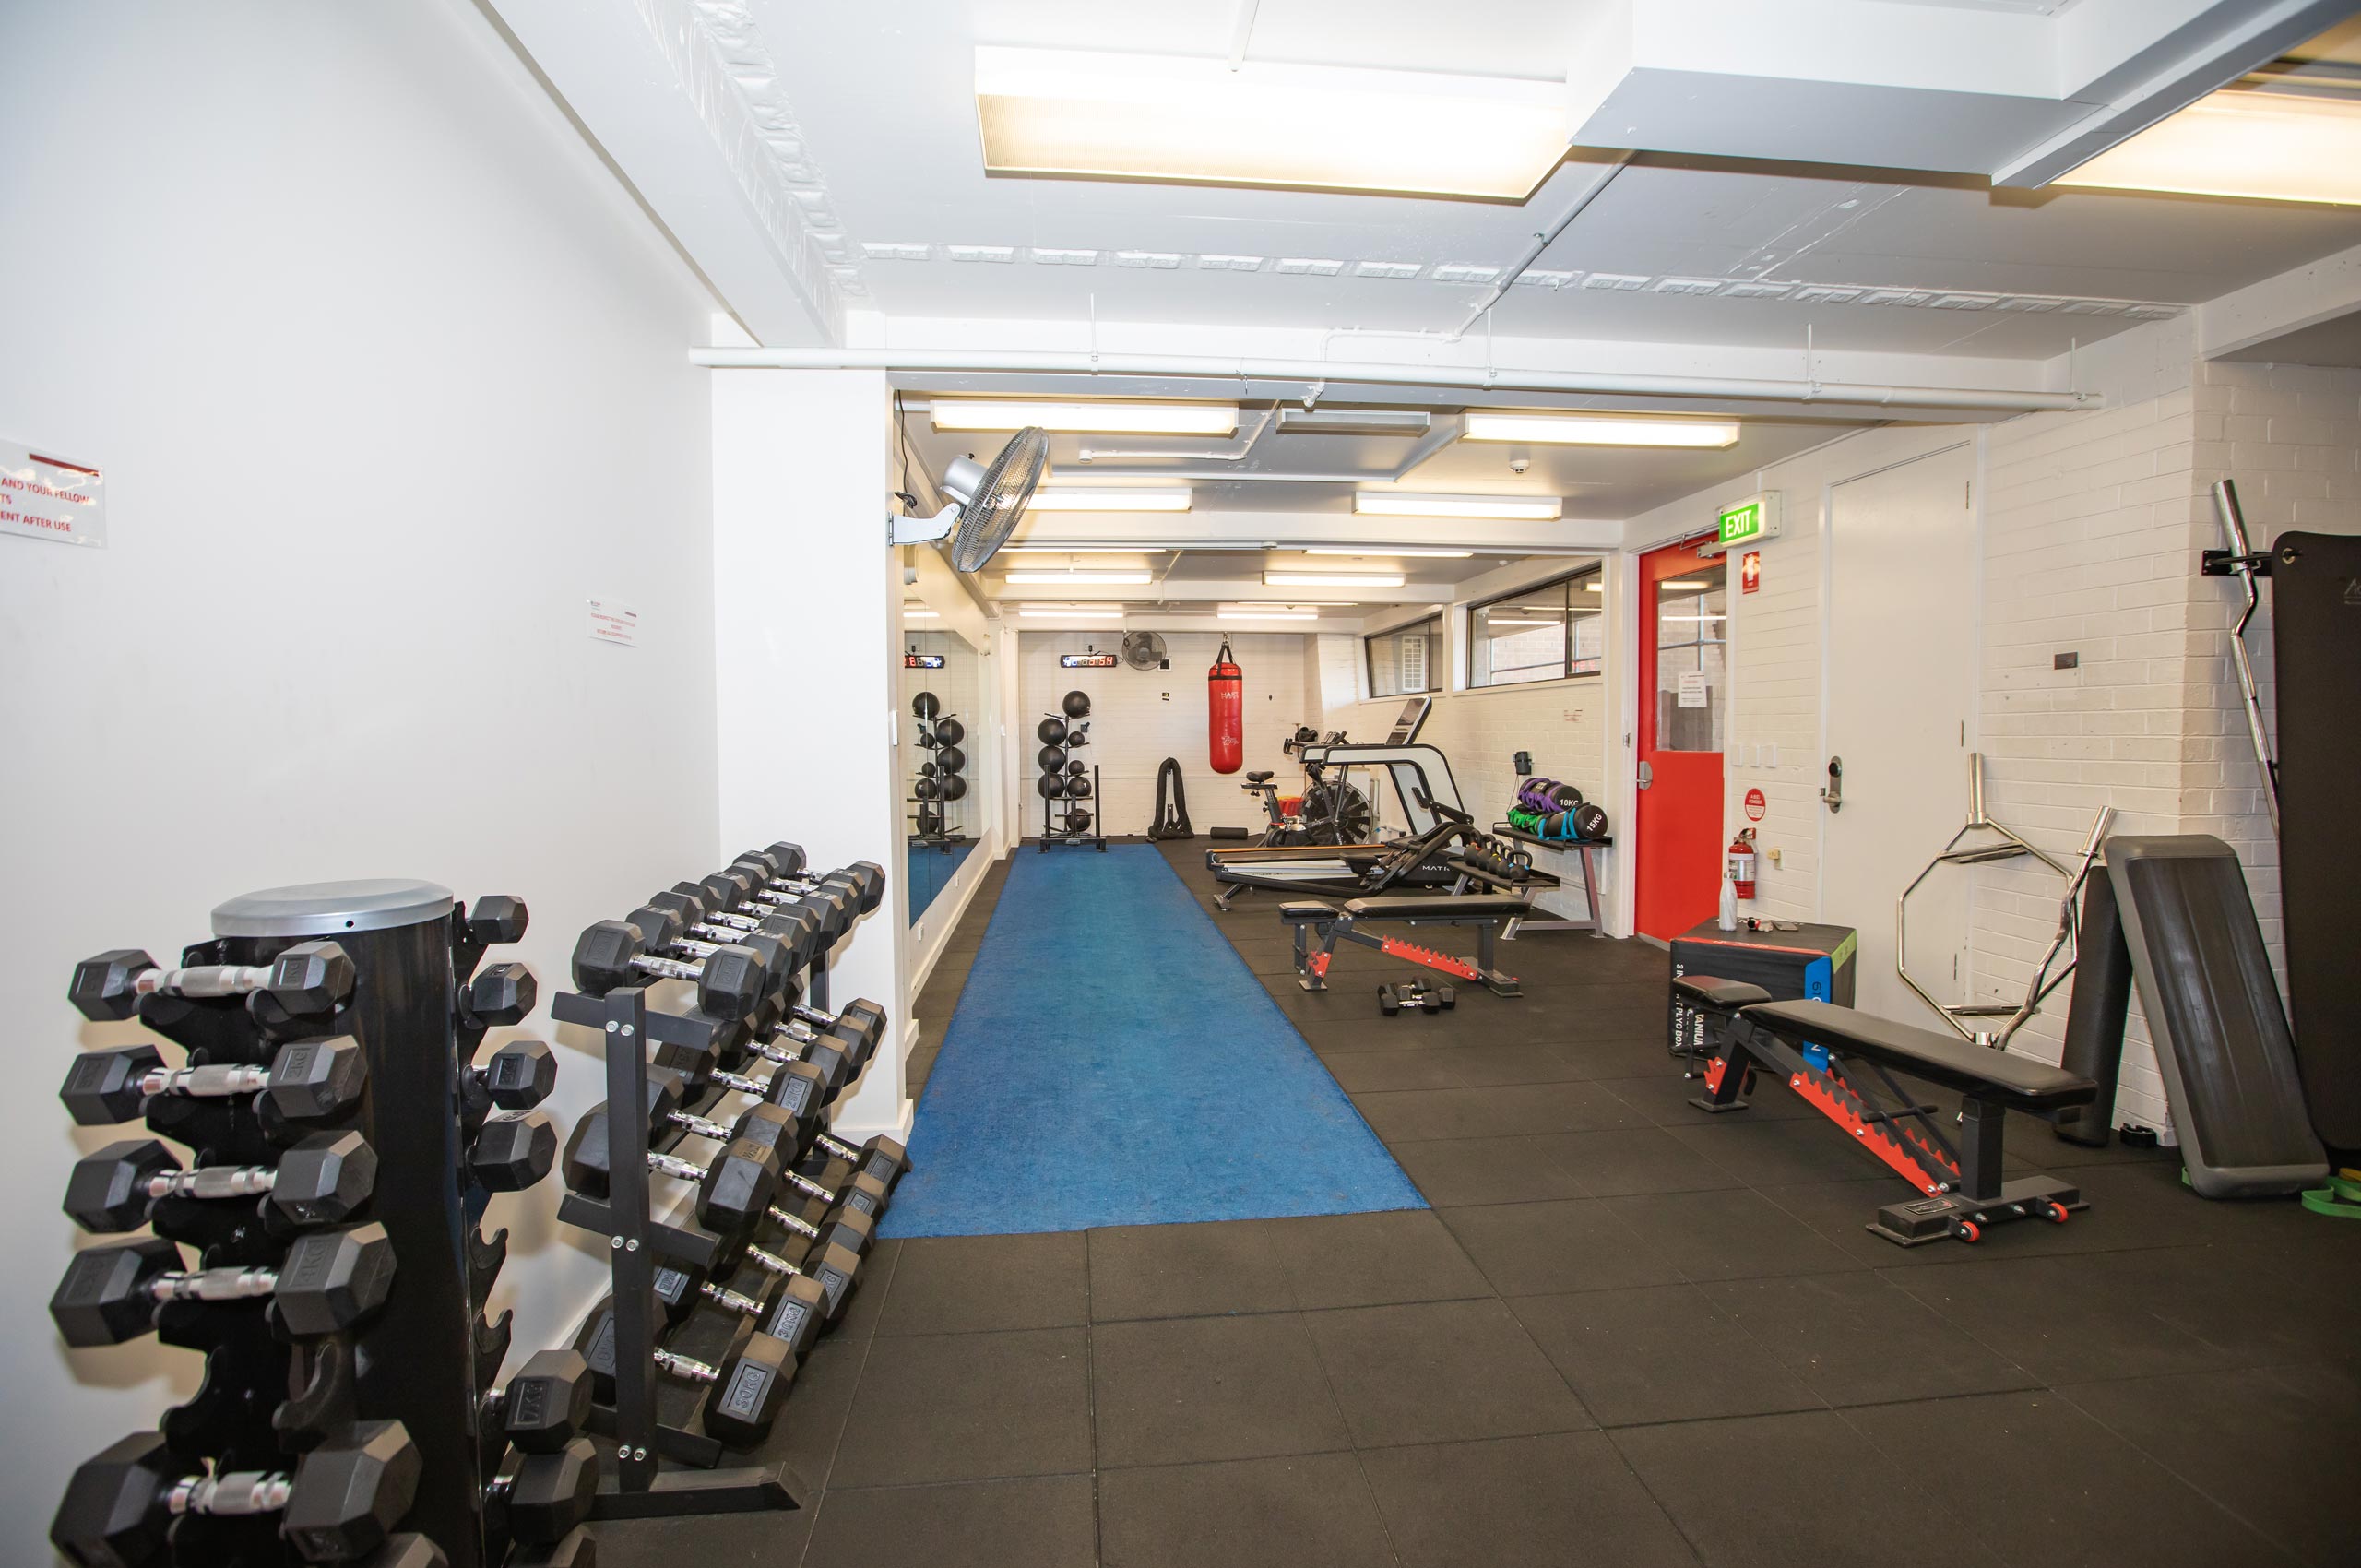 Gym facilities for personal fitness. 